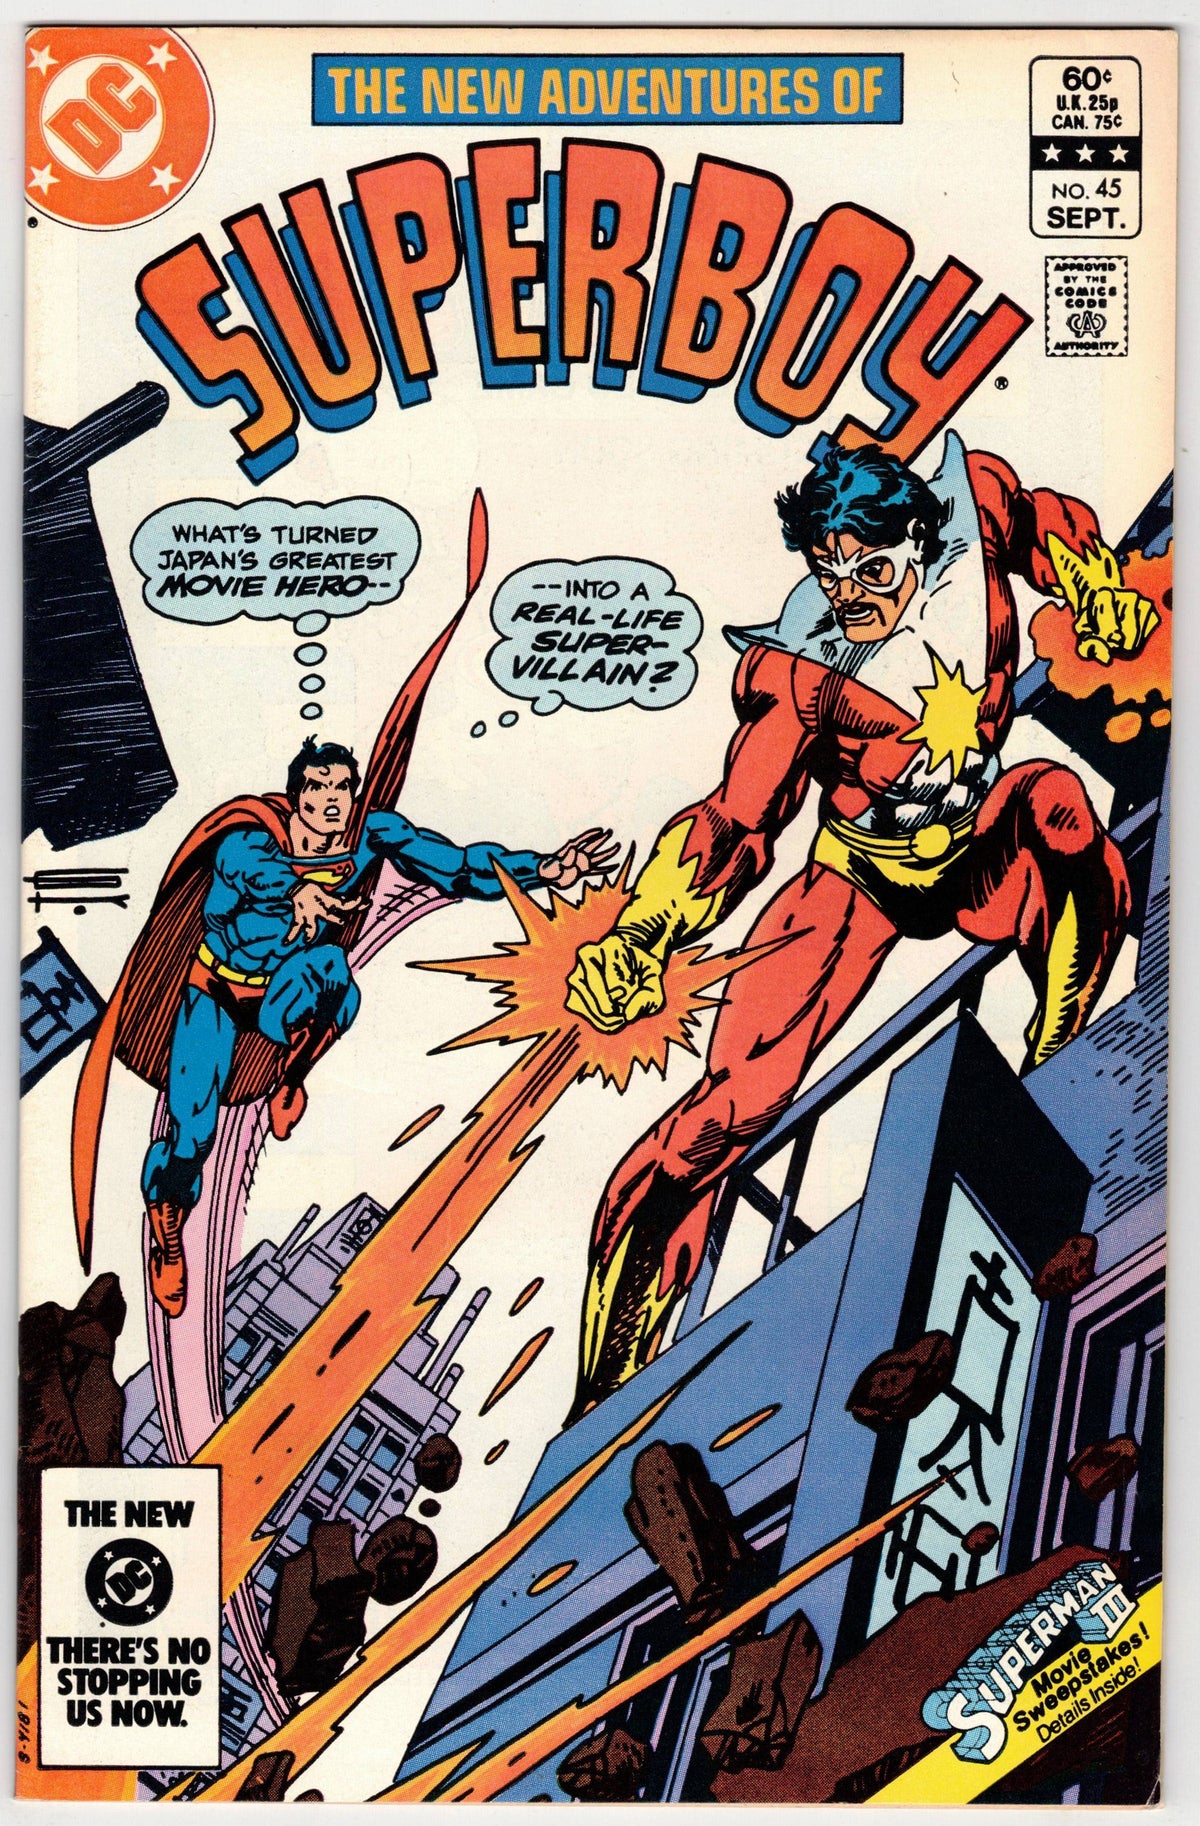 Photo of New Adventures of Superboy (1983) Issue 45 - Comic sold by Stronghold Collectibles